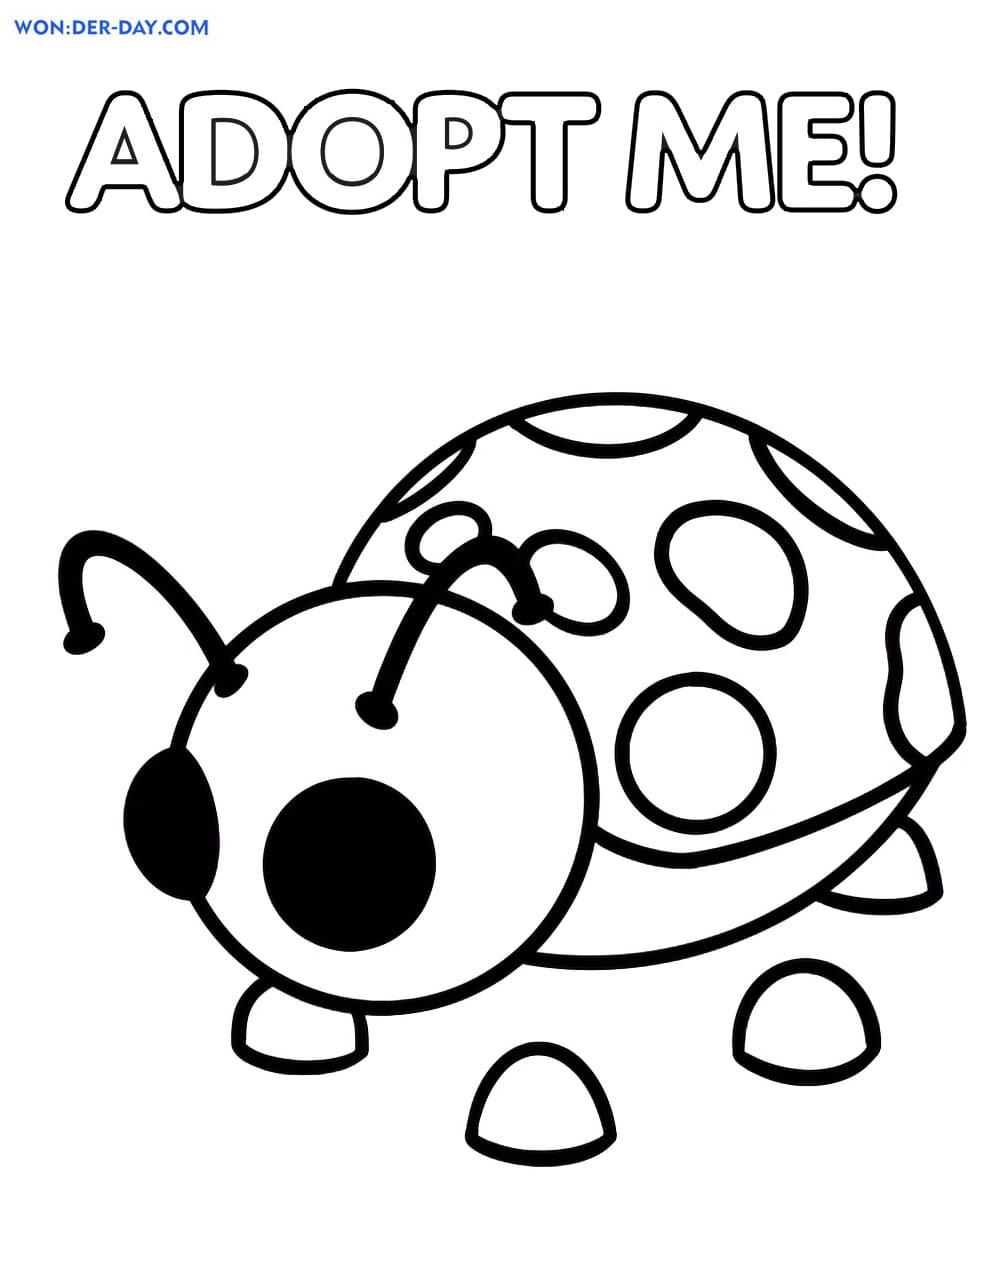 Adopt Me Coloring pages   Wonder day.com